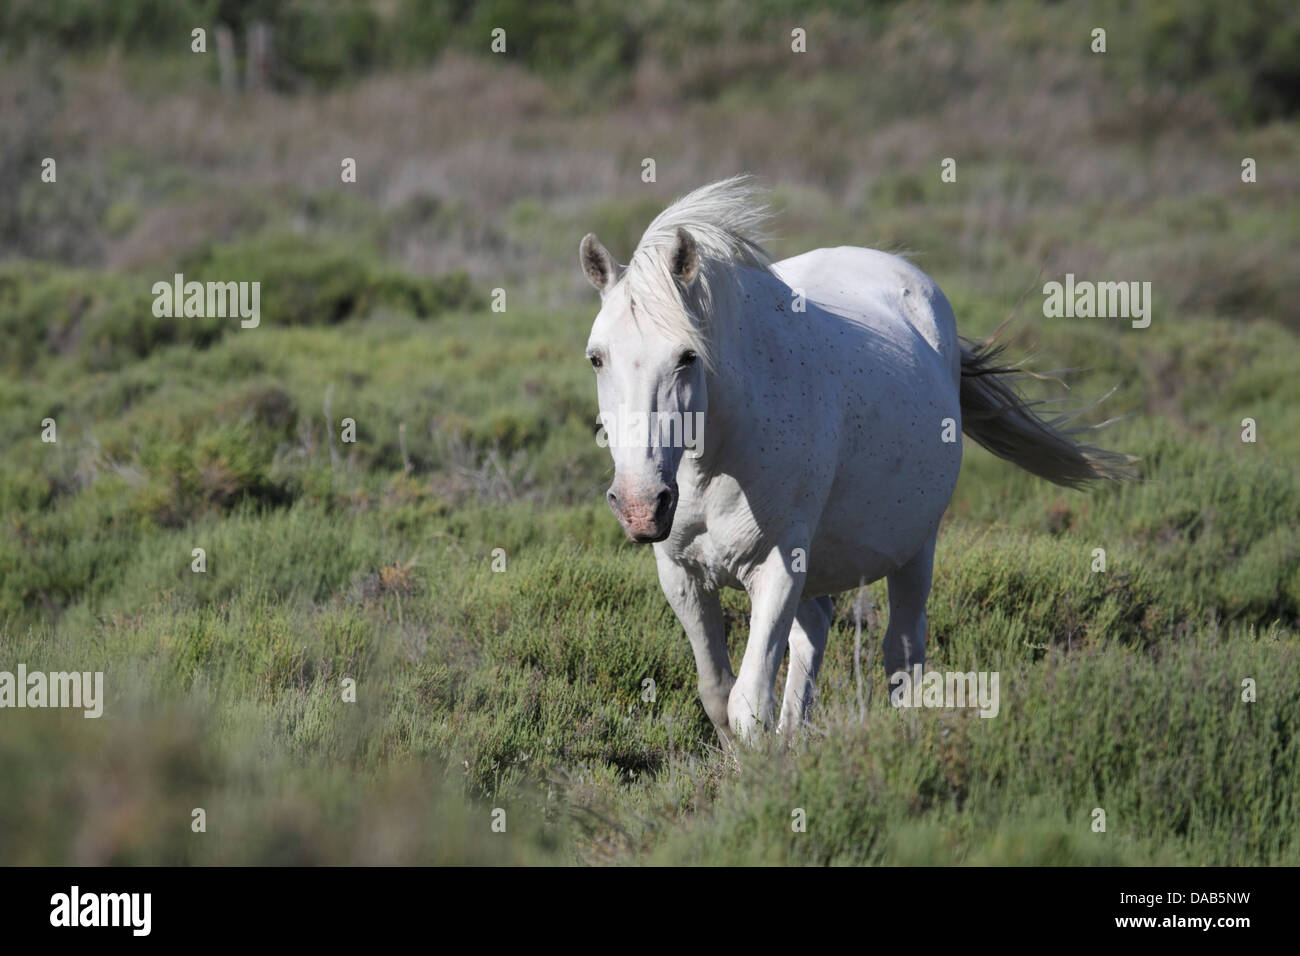 White horse in France Stock Photo